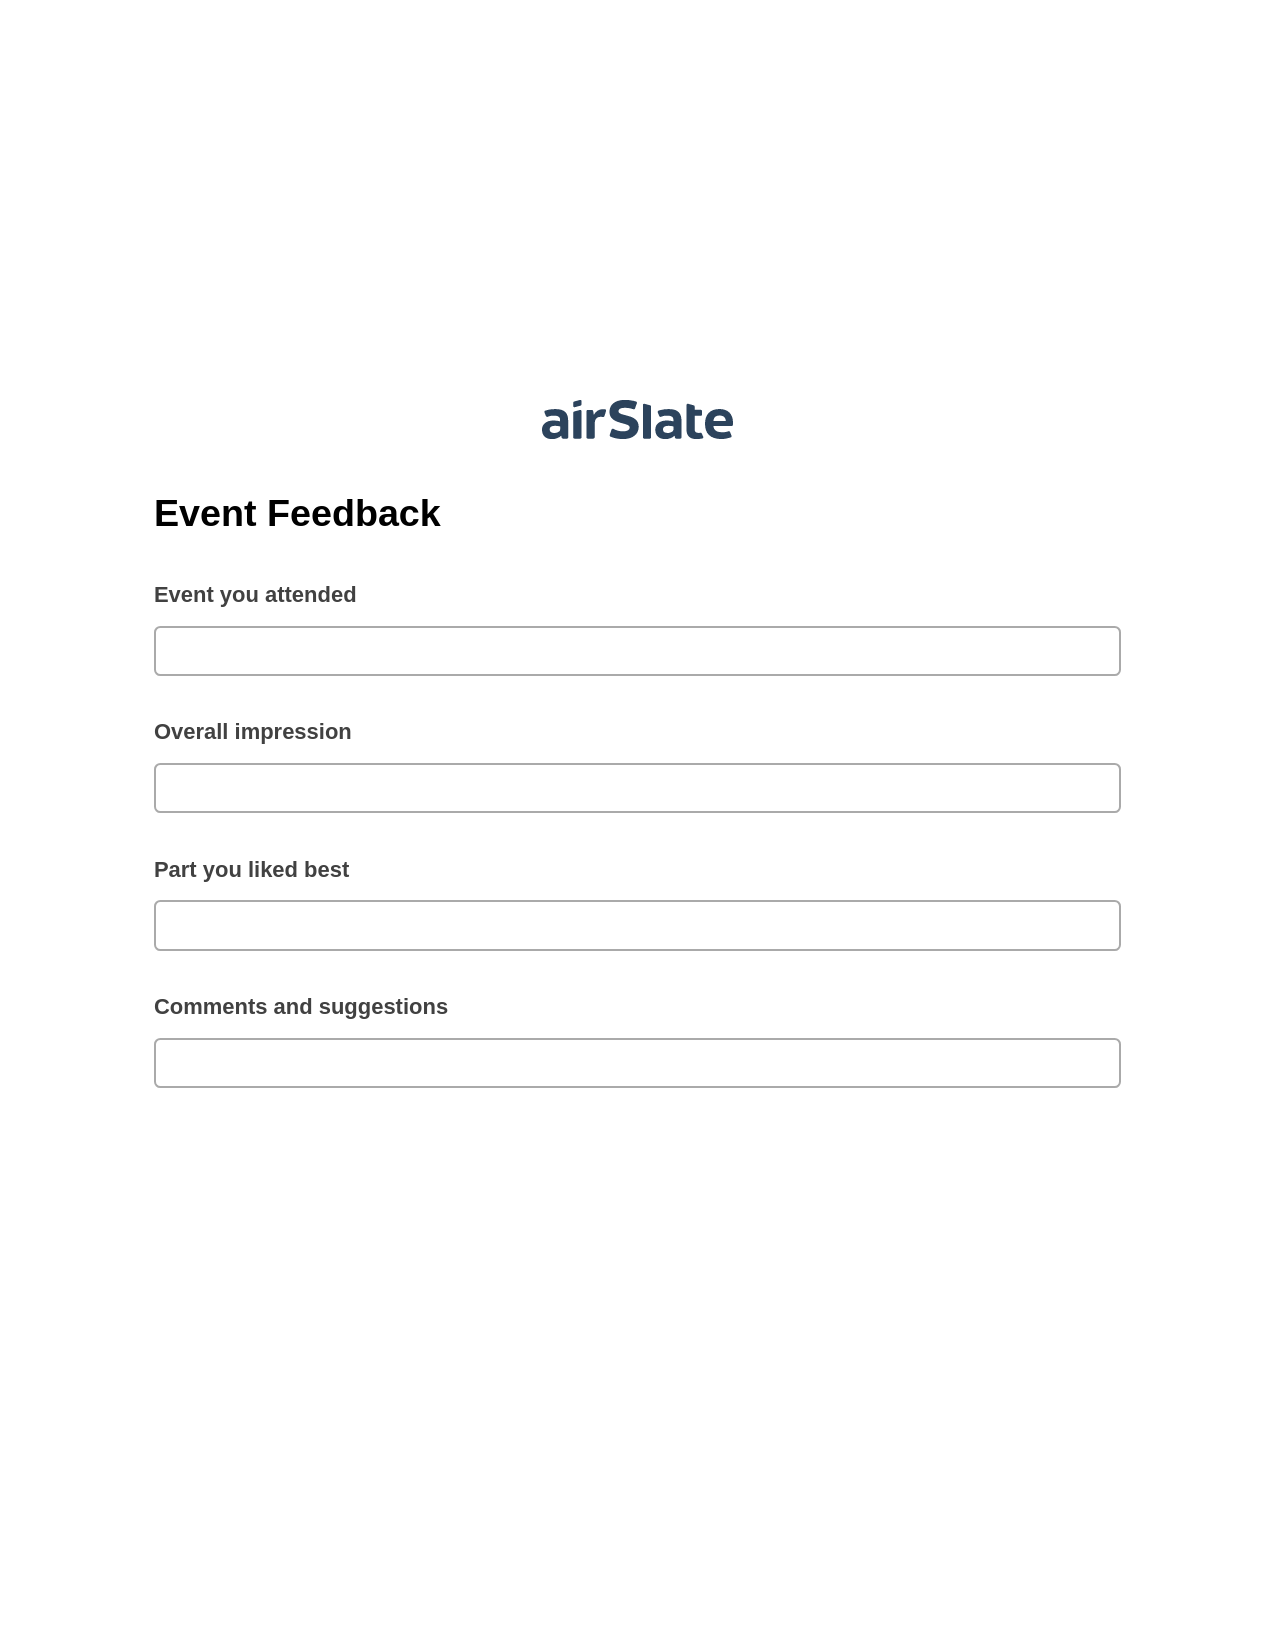 Event Feedback Pre-fill Dropdowns from MySQL Bot, Lock the slate bot, Archive to SharePoint Folder Bot